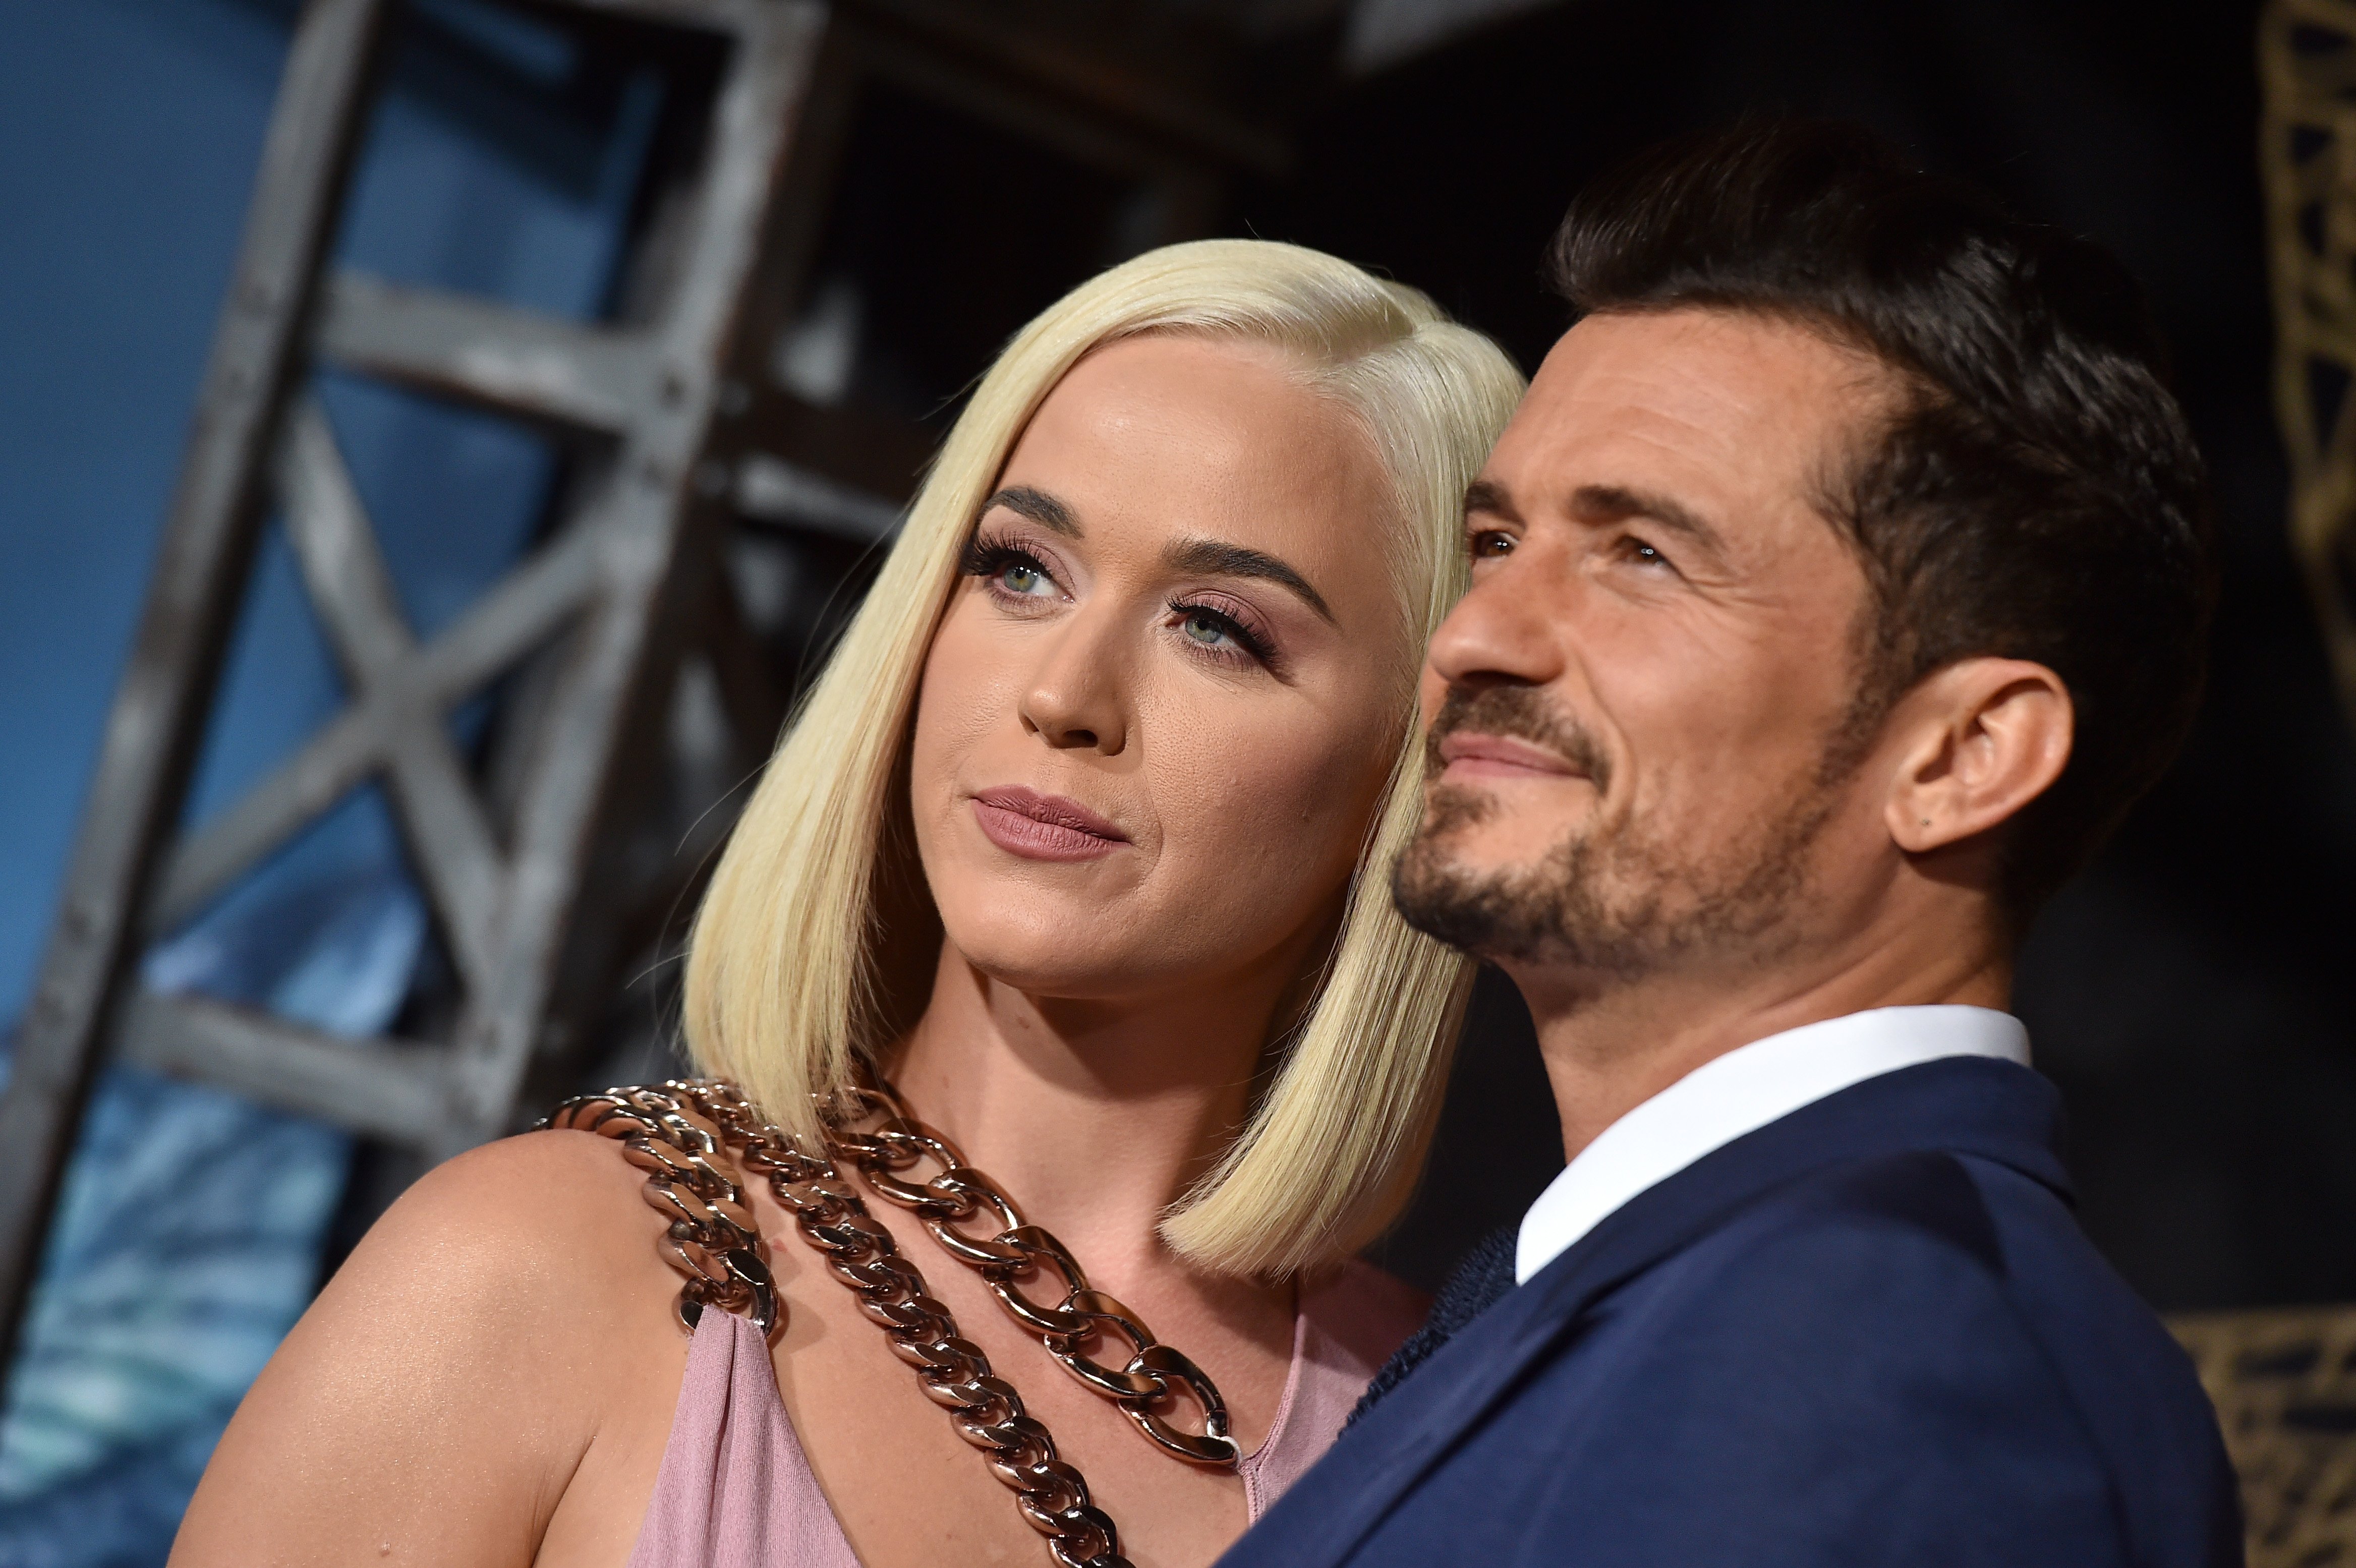 Katy Perry and Orlando Bloom attend Amazon's "Carnival Row" series premiere at TCL Chinese Theatre on August 21, 2019, in Hollywood, California. | Source: Getty Images